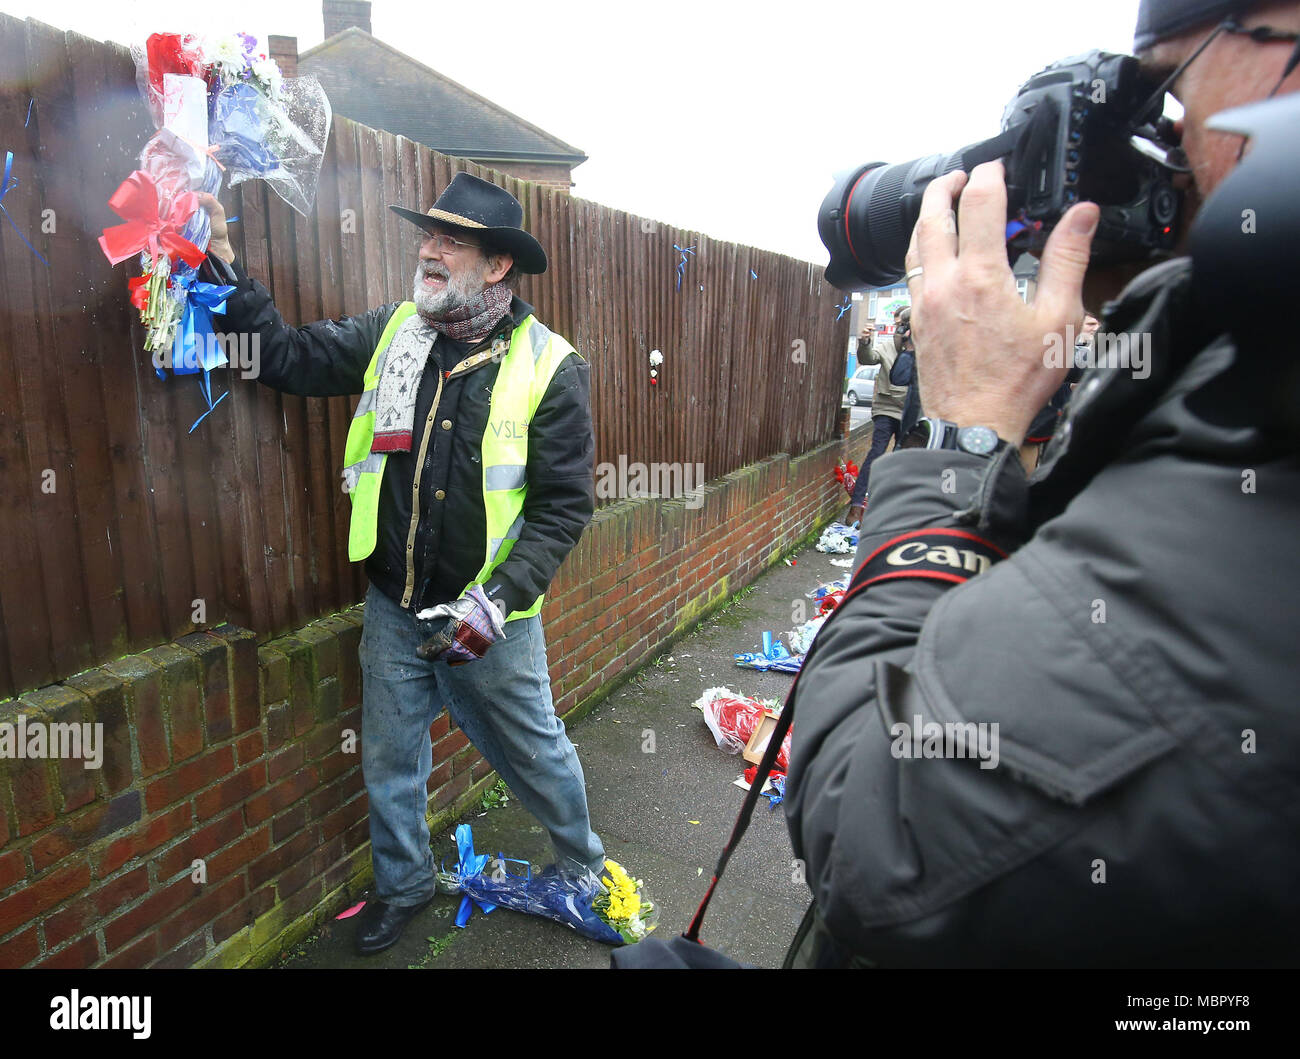 Iain Gordon pulls the flowers down from a fence opposite the house of Richard Osborn-Brooks in South Park Crescent in Hither Green, London, after it has become an unlikely flashpoint of tensions between the grieving family and his neighbours since last week's incident after burglar Henry Vincent was killed by Richard Osborn-Brooks at his house. Stock Photo